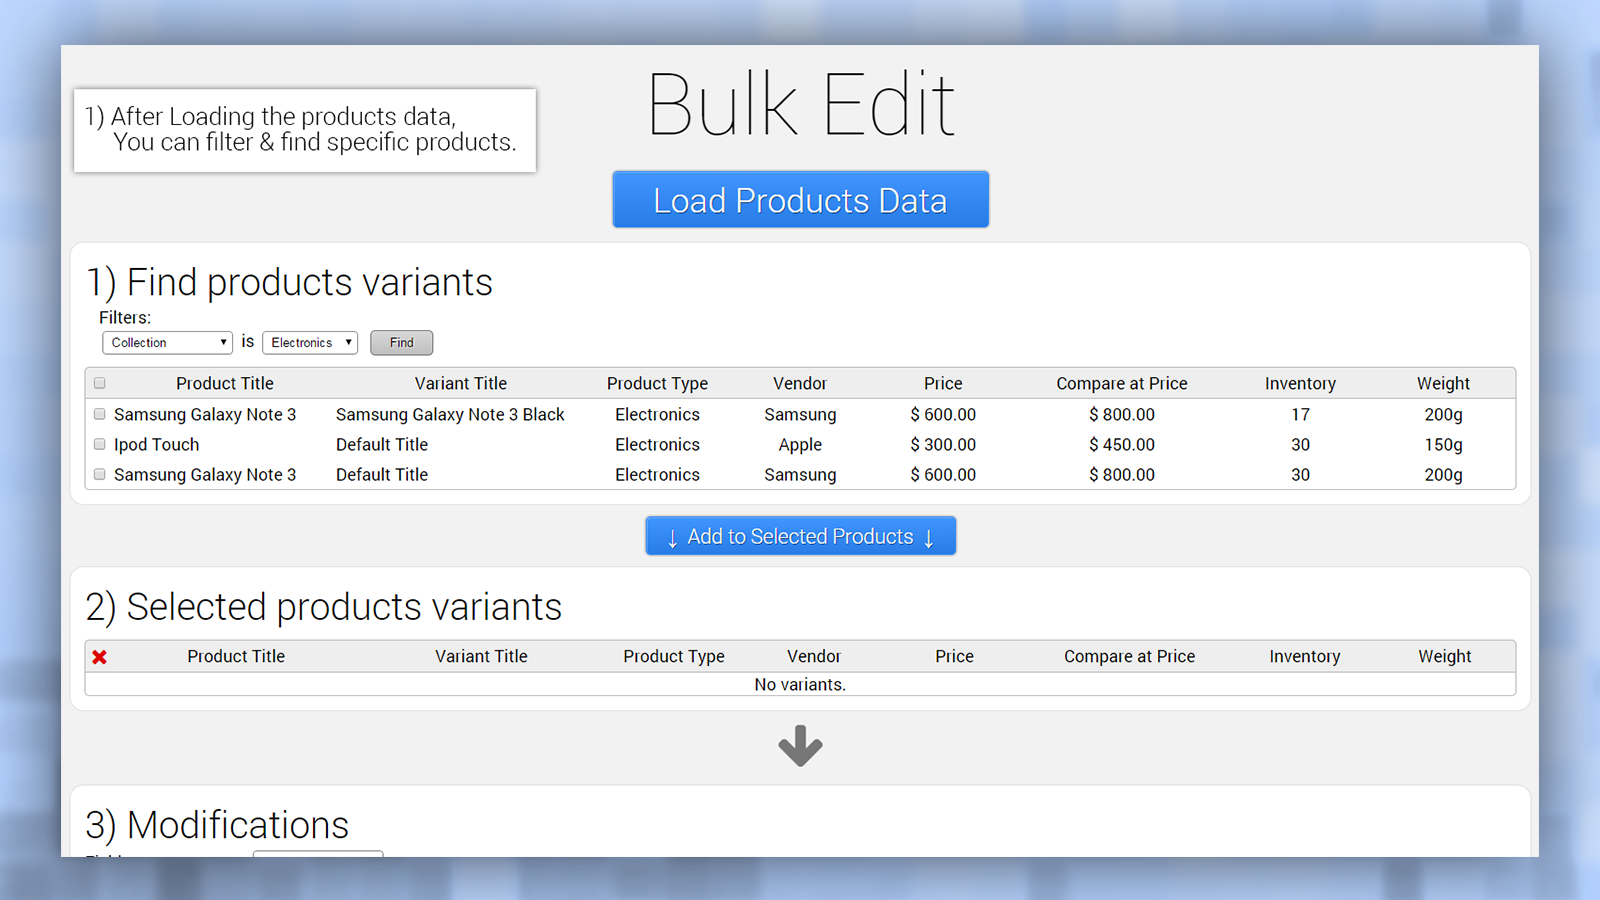 Admin panel step 1, find product variants